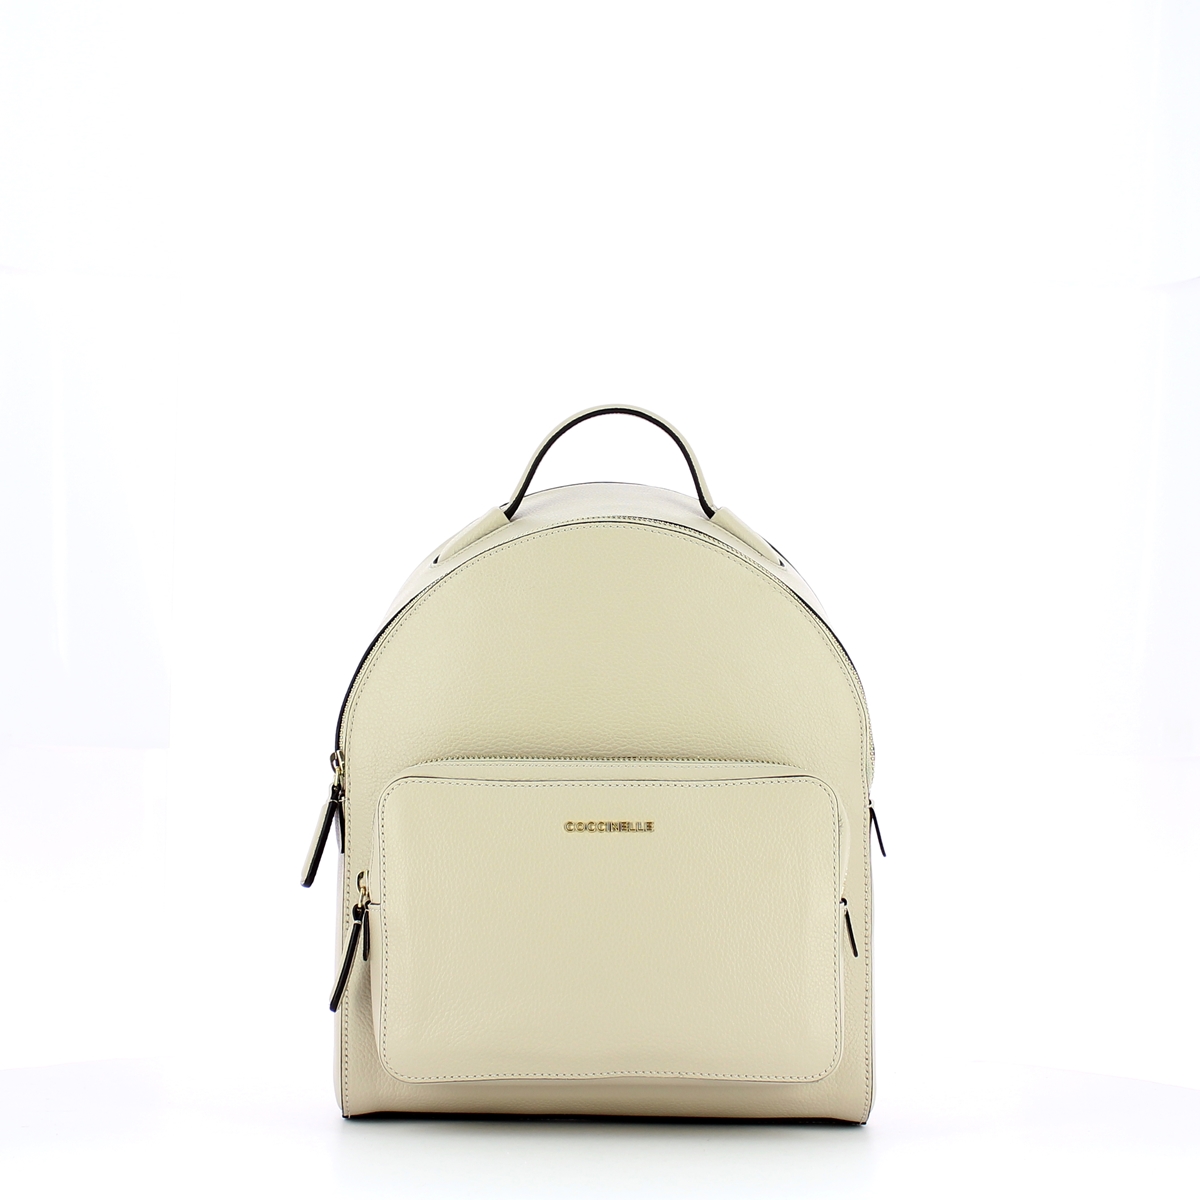 Clementine backpack in soft leather Coccinelle | Bagalier.com